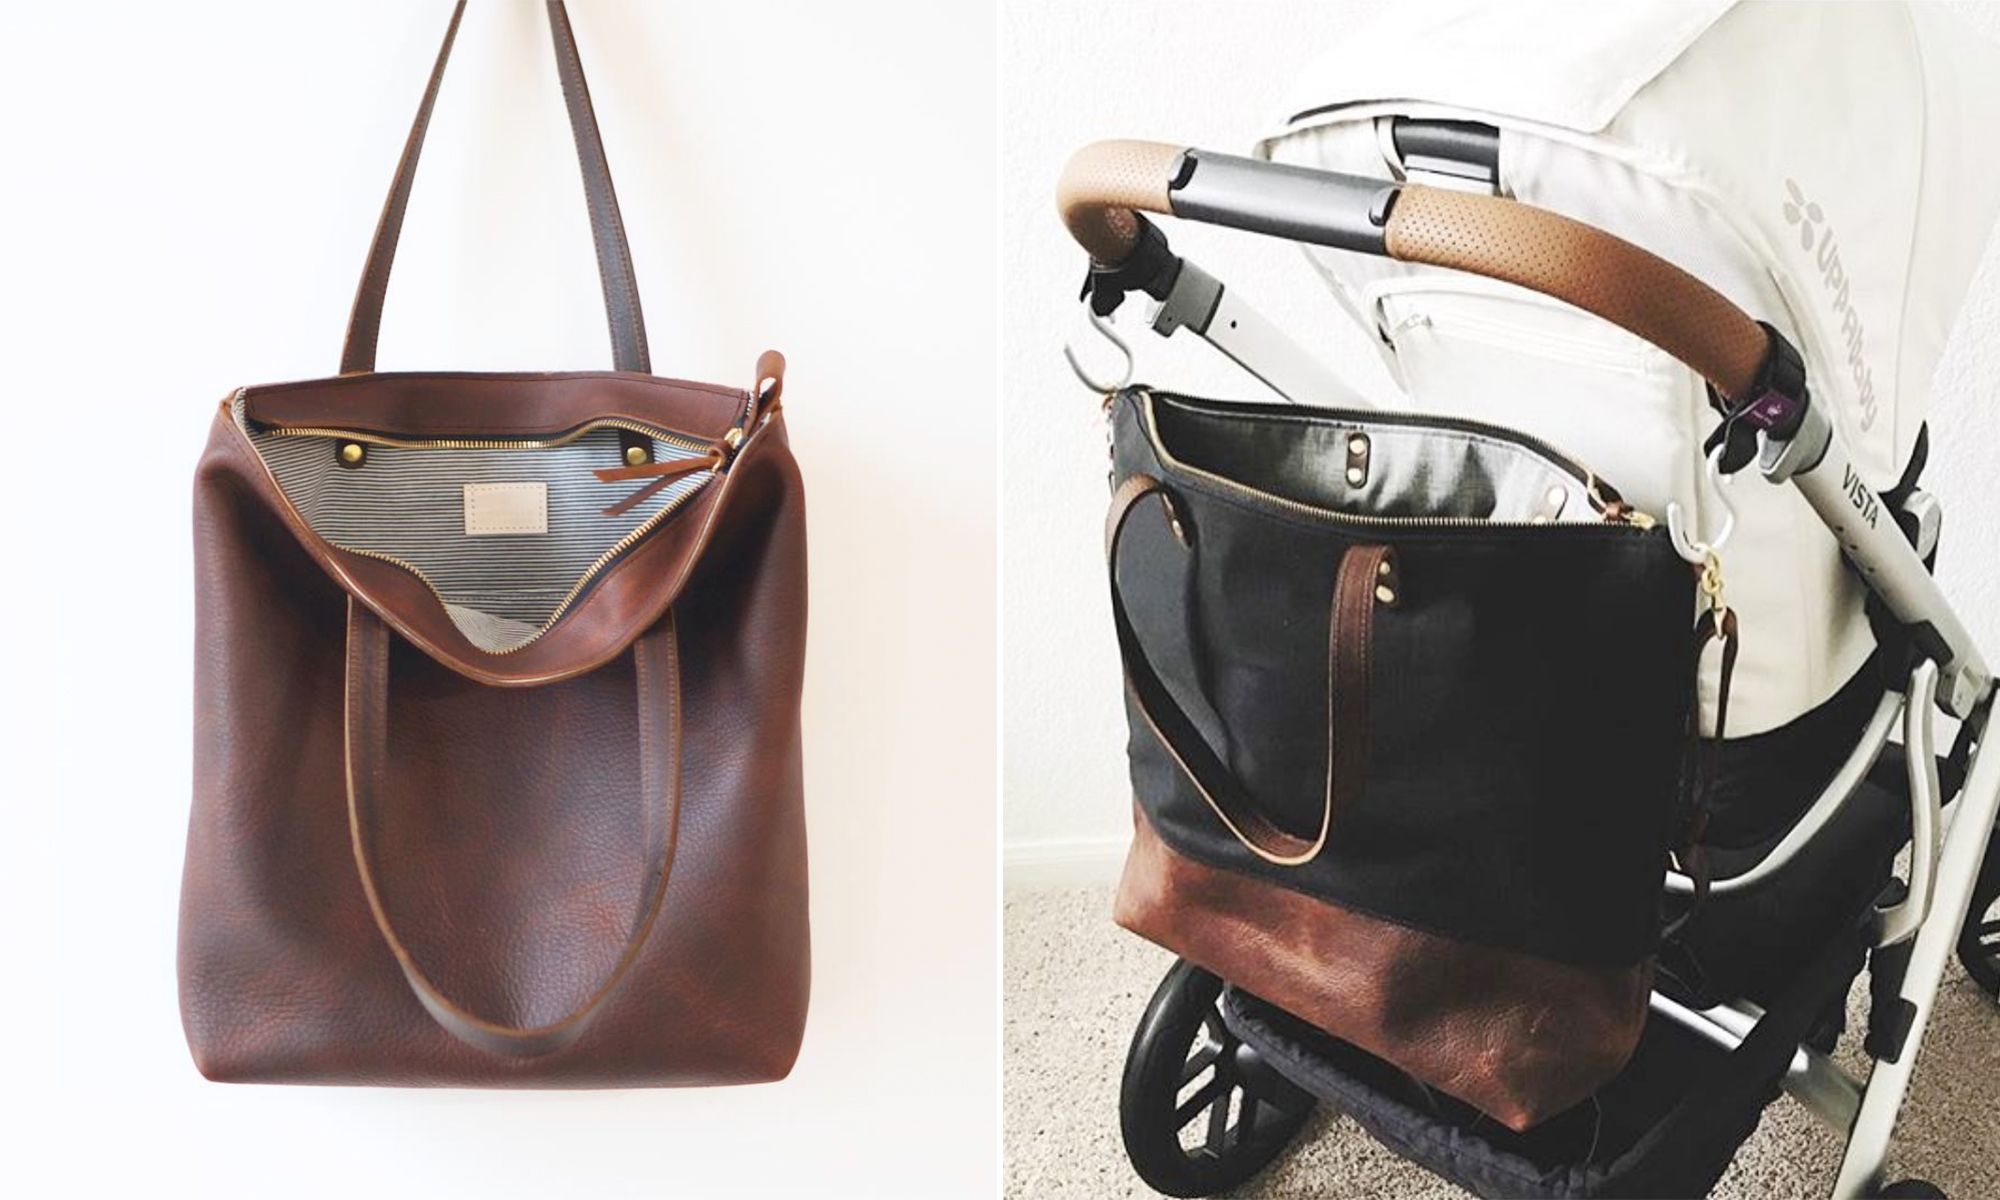 Umbrella Collective  Leather Bags, Leather Goods, Handmade in